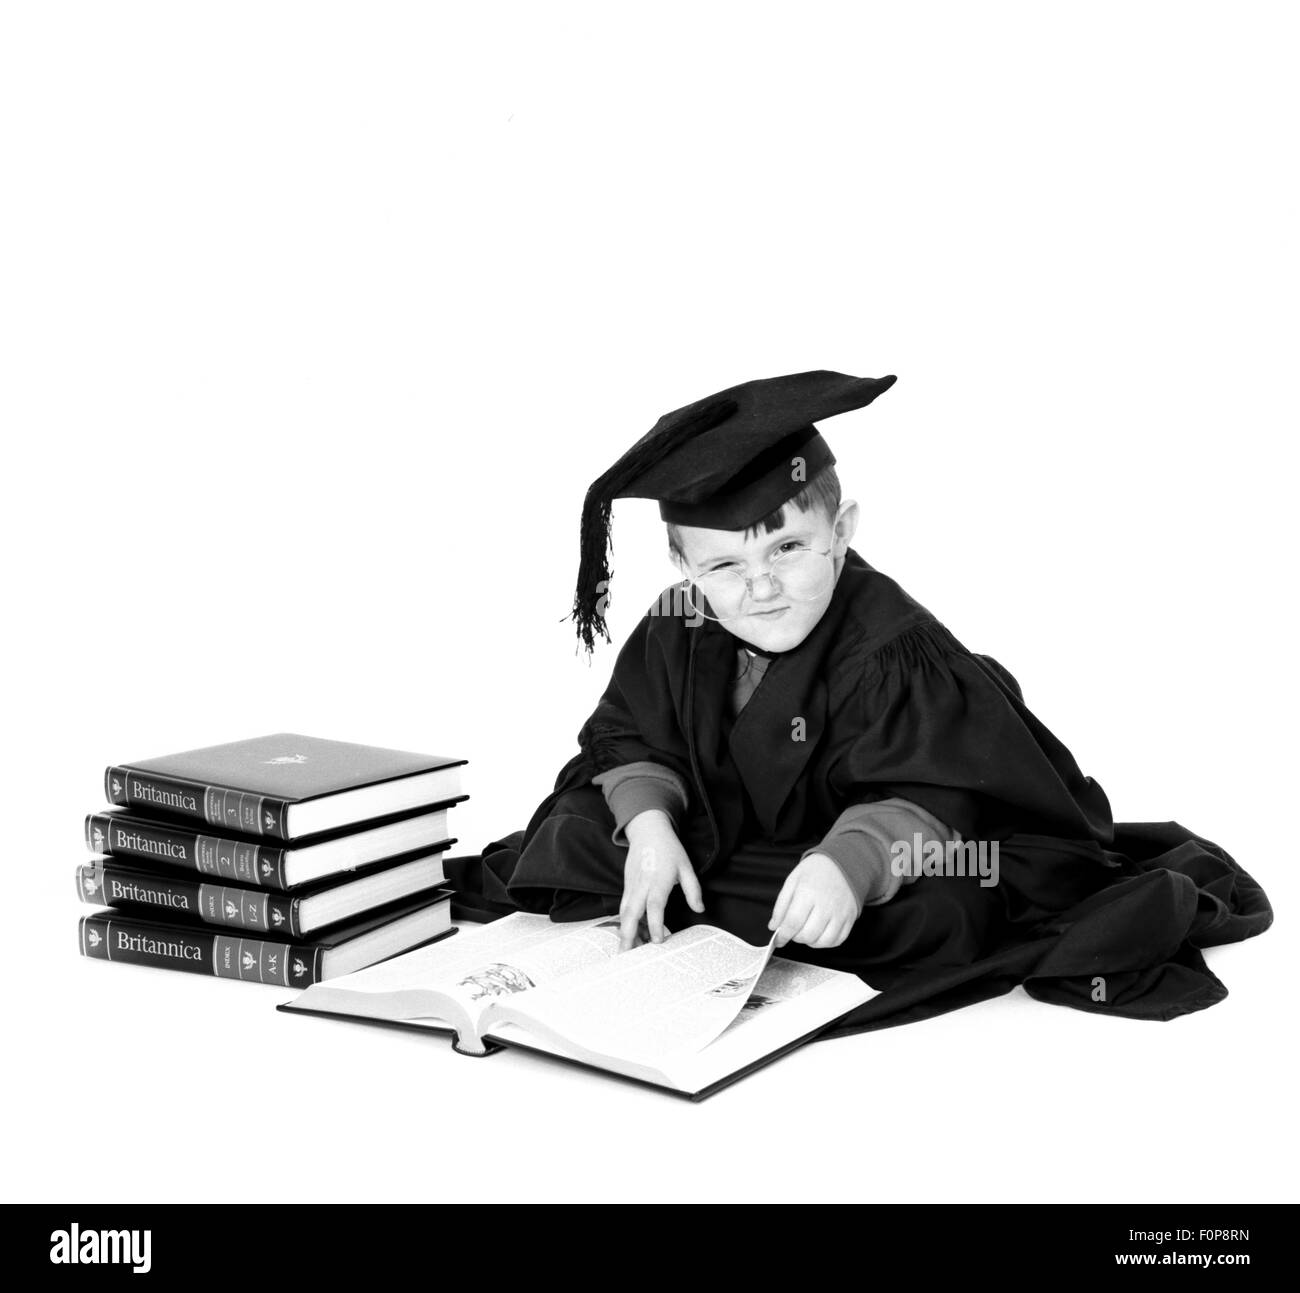 Young boy dressed in mortar board and gown reading Encyclopaedia Britannica Stock Photo